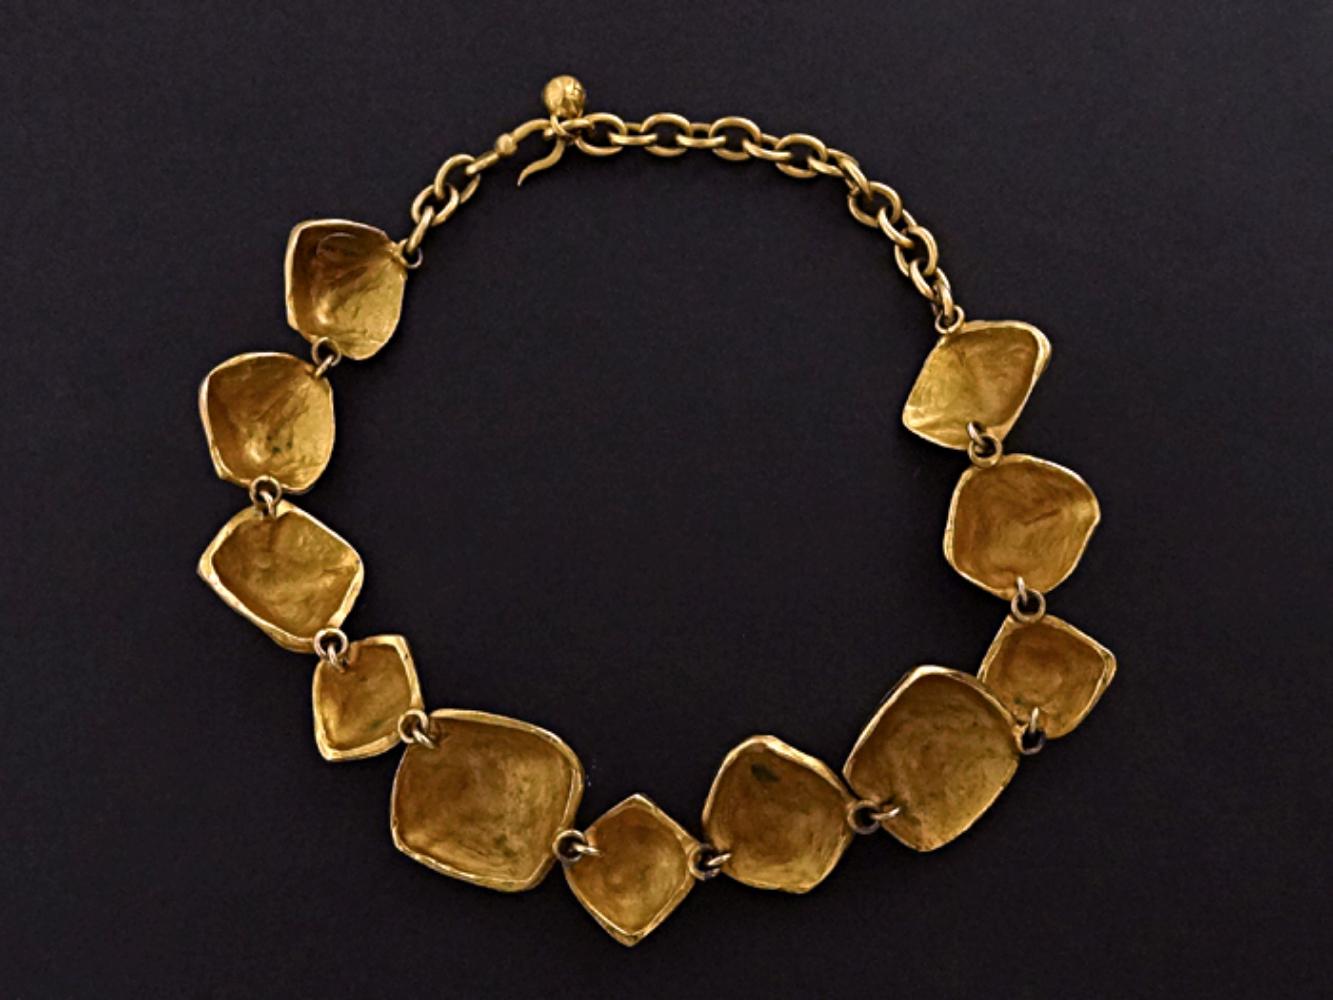 Hermes Vintage Gold Plated Necklace Choker 1970s In Excellent Condition For Sale In Hiroshima City, JP